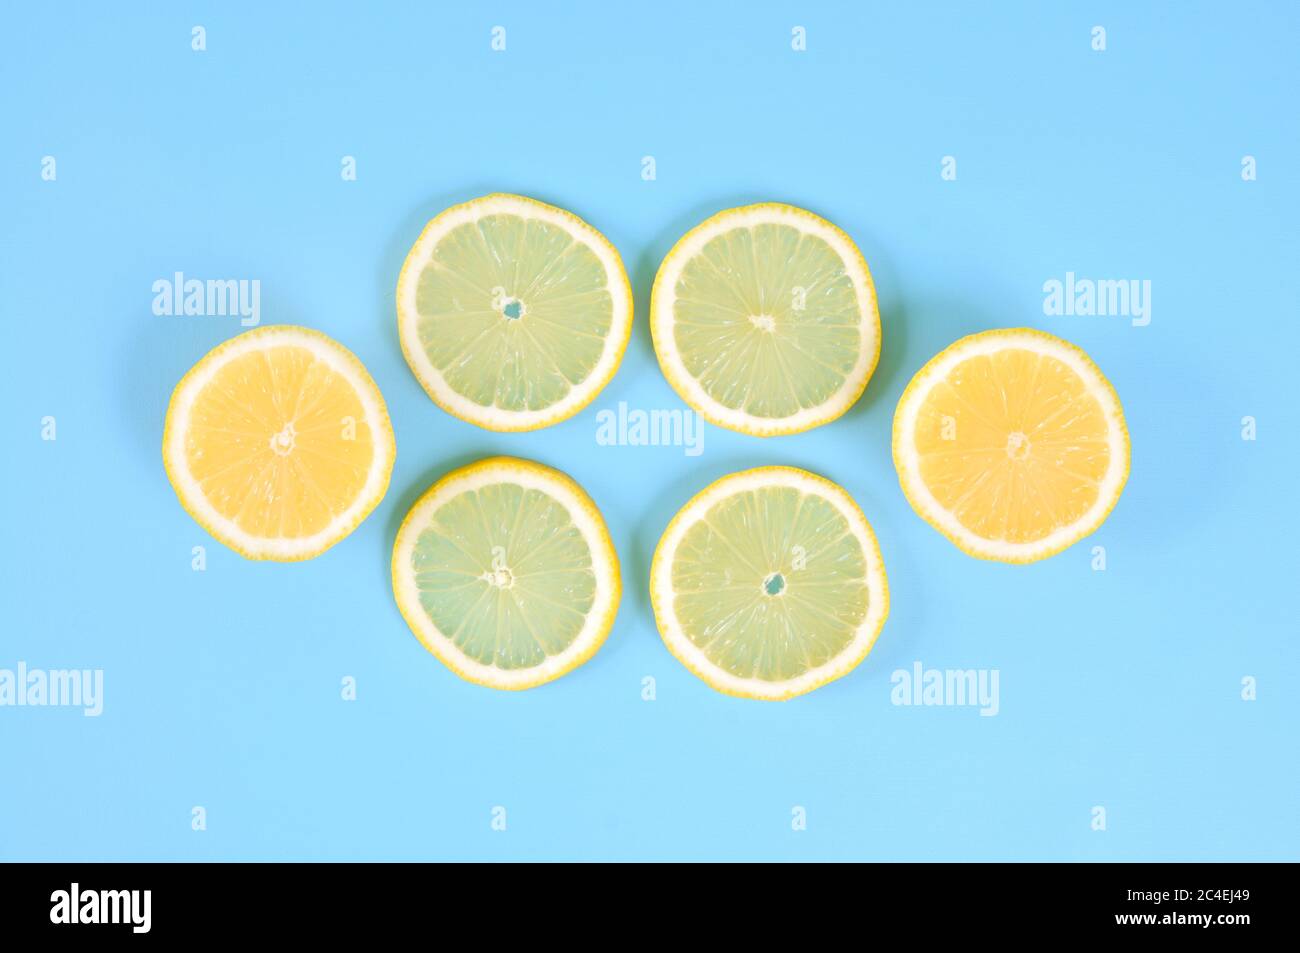 Lemon slices on blue background, top view Stock Photo